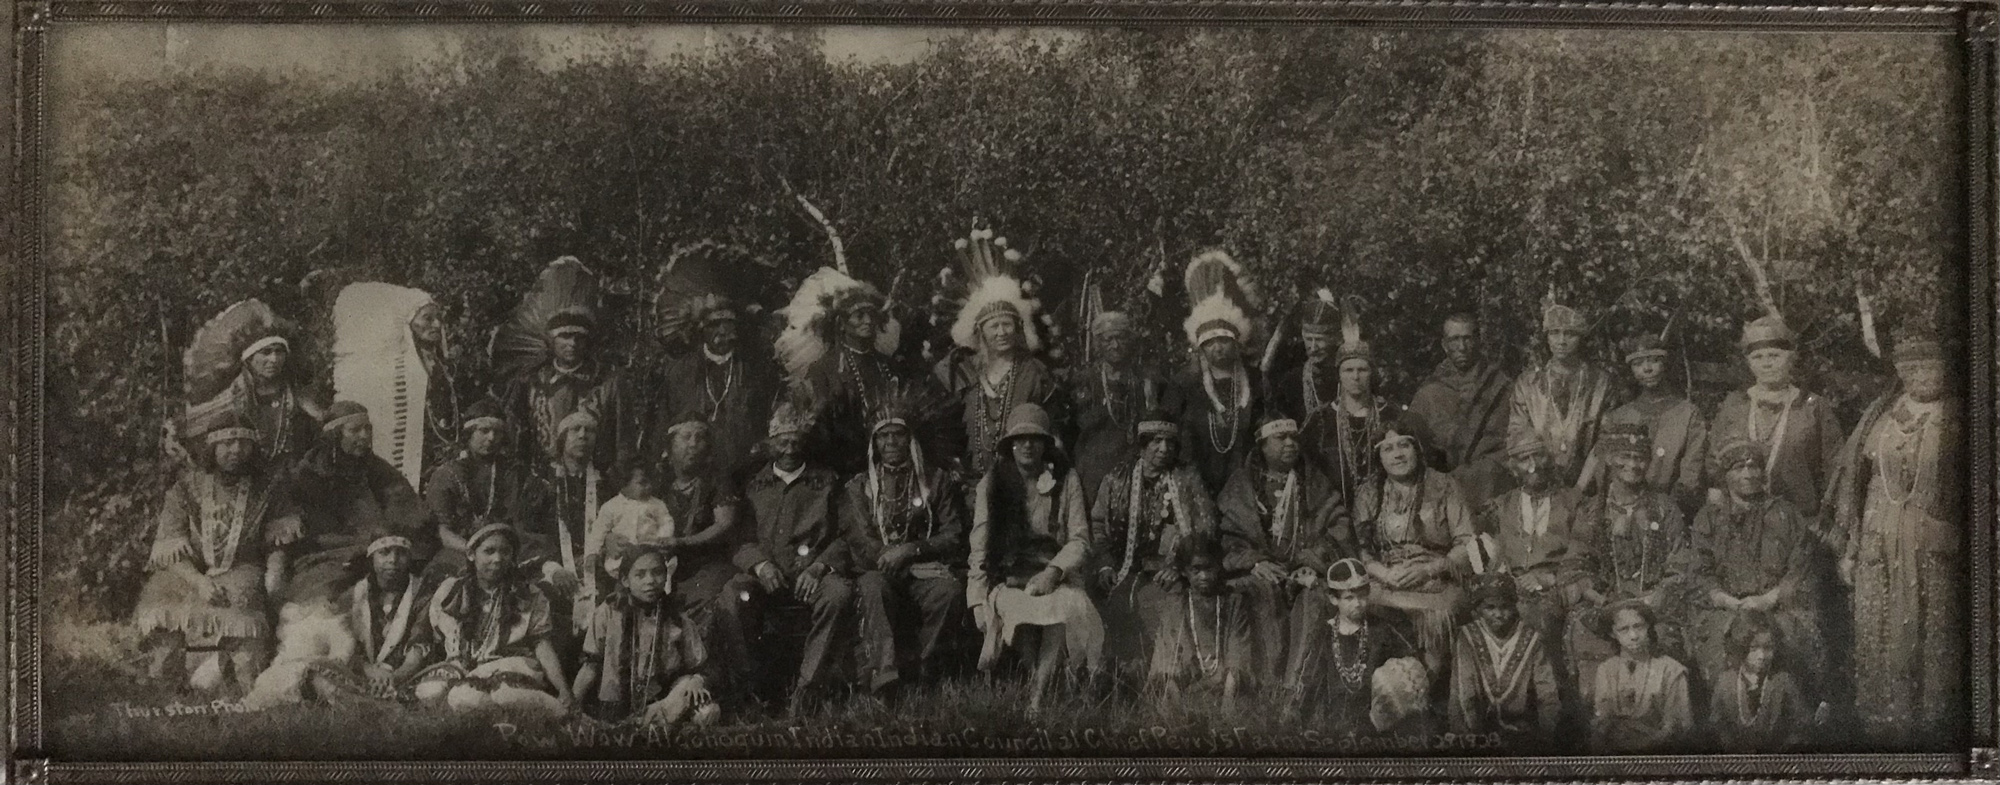 Pow Wow Algonquin Indian Indian Council at Chief Perrys Farm September 29, 1928